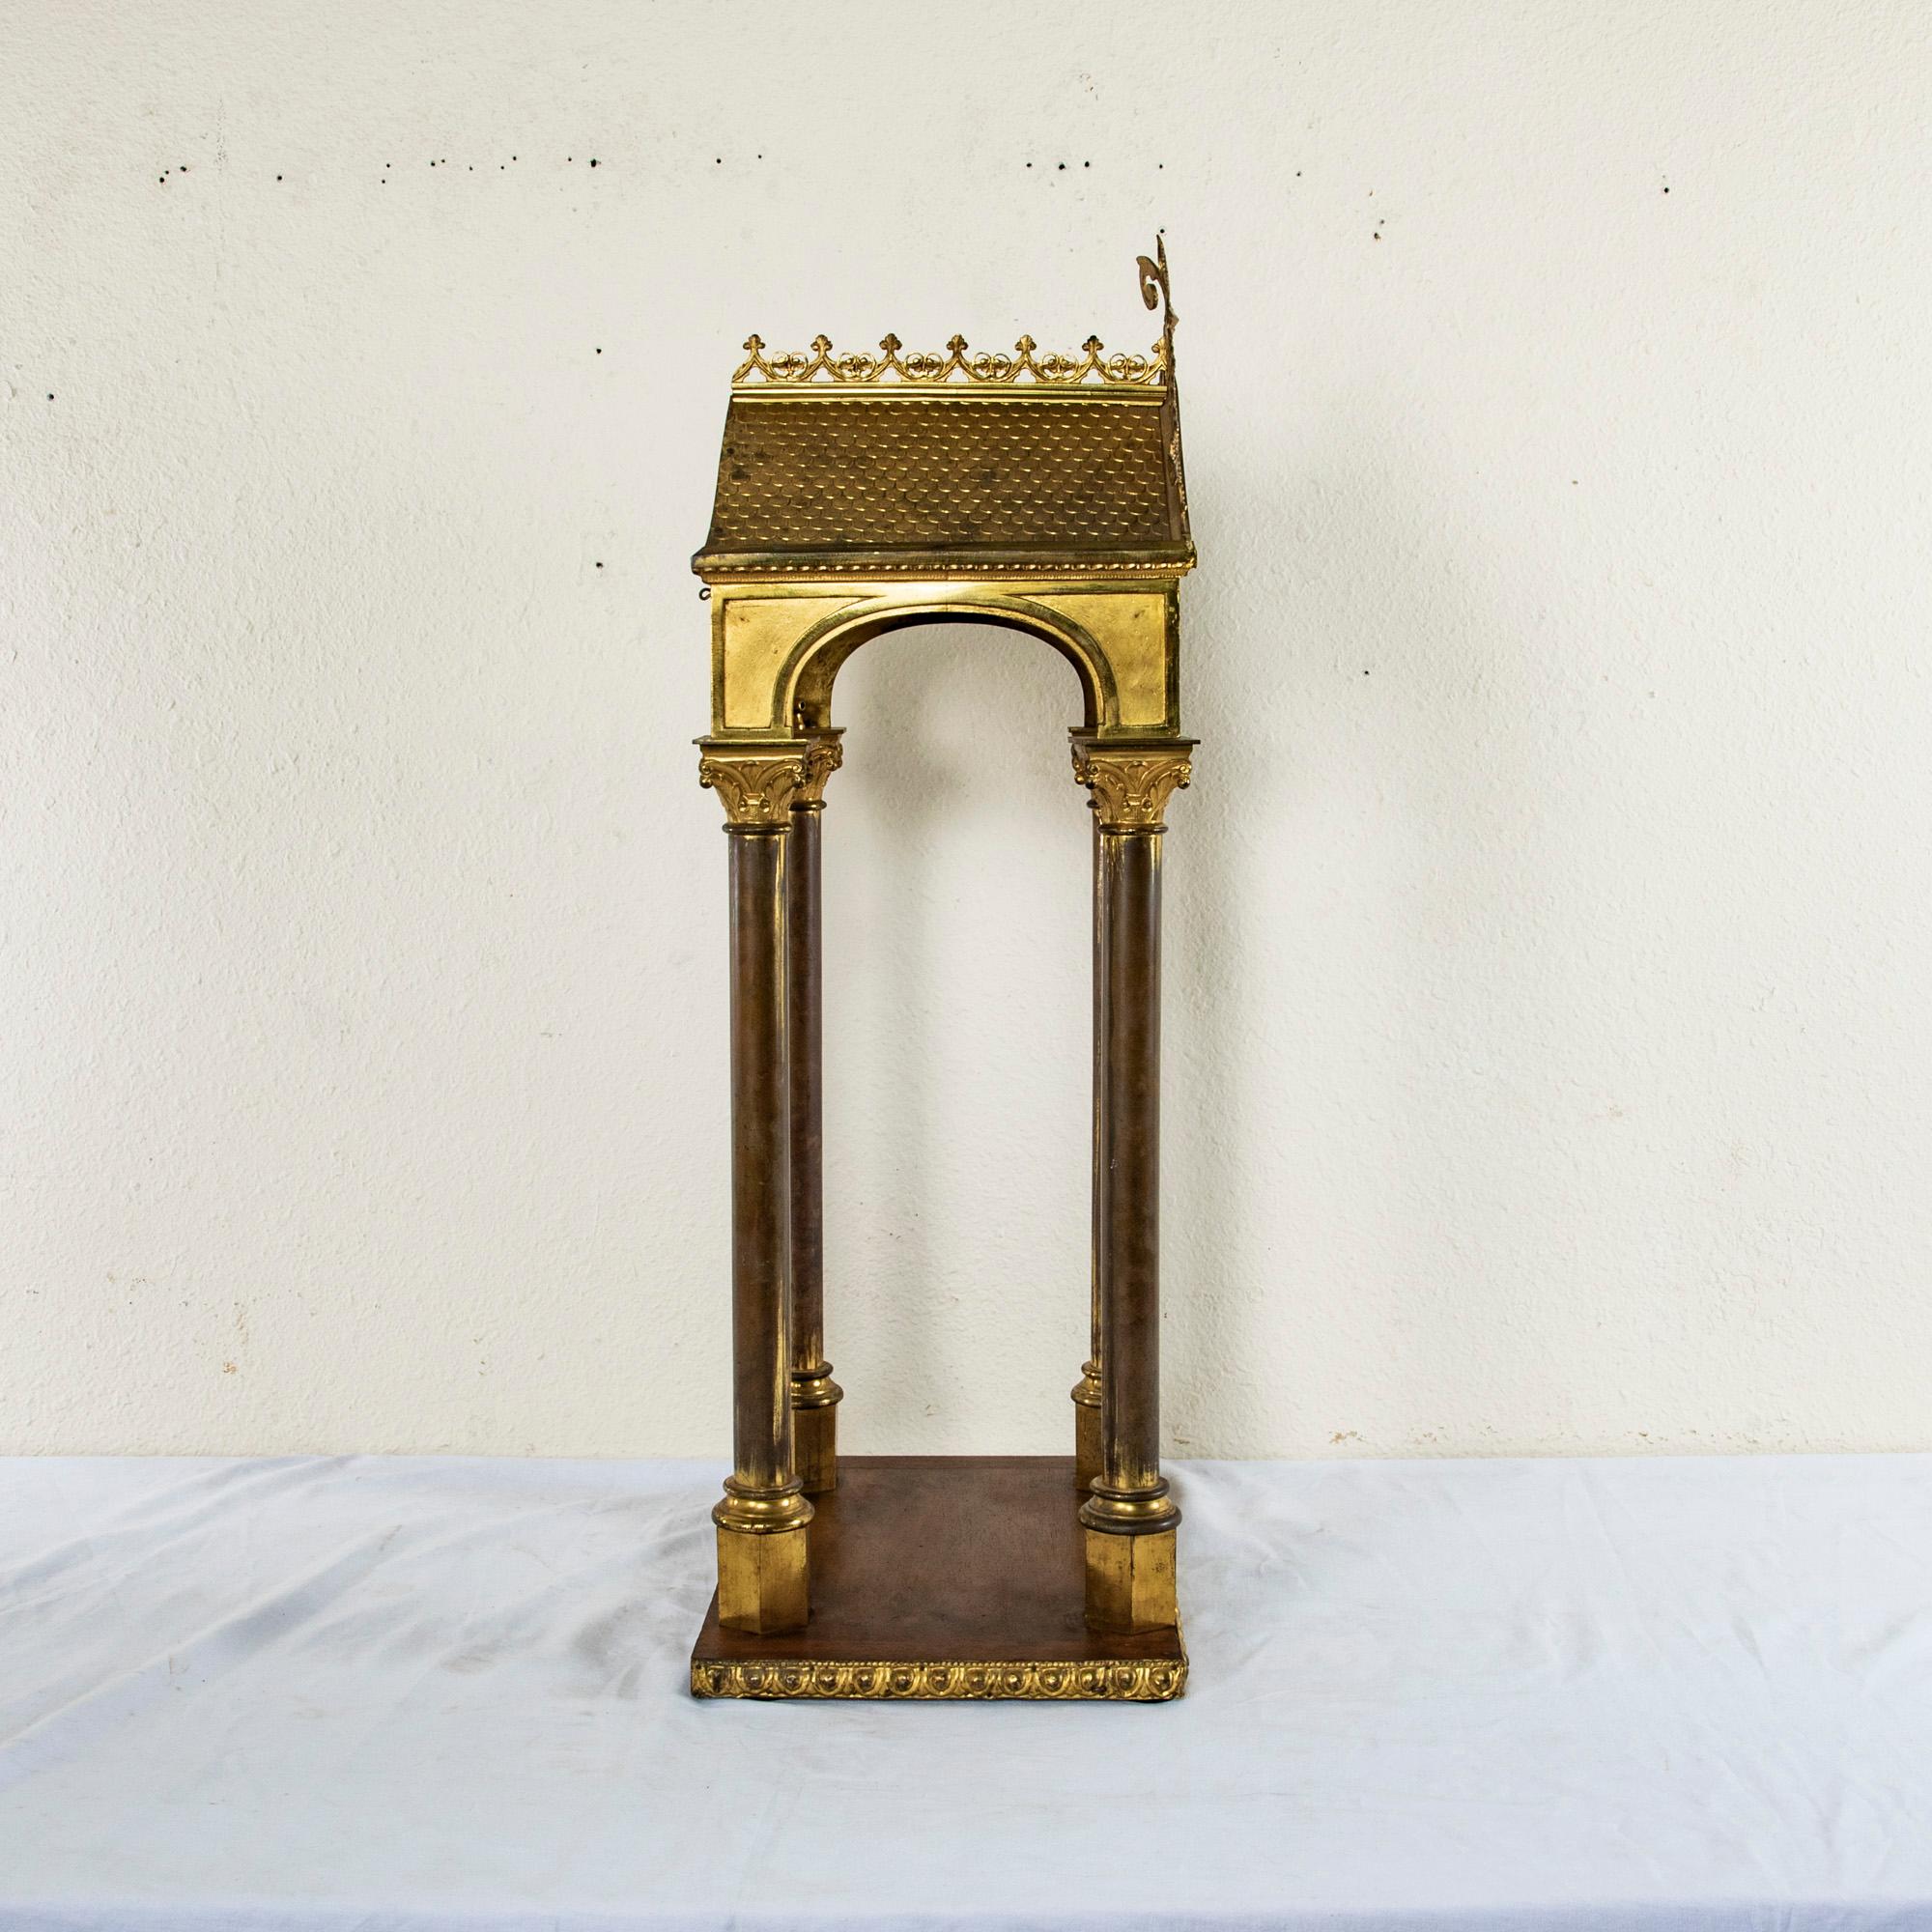 Early 20th Century Italian Gilt Brass and Wooden Altar or Sculpture Stand For Sale 2